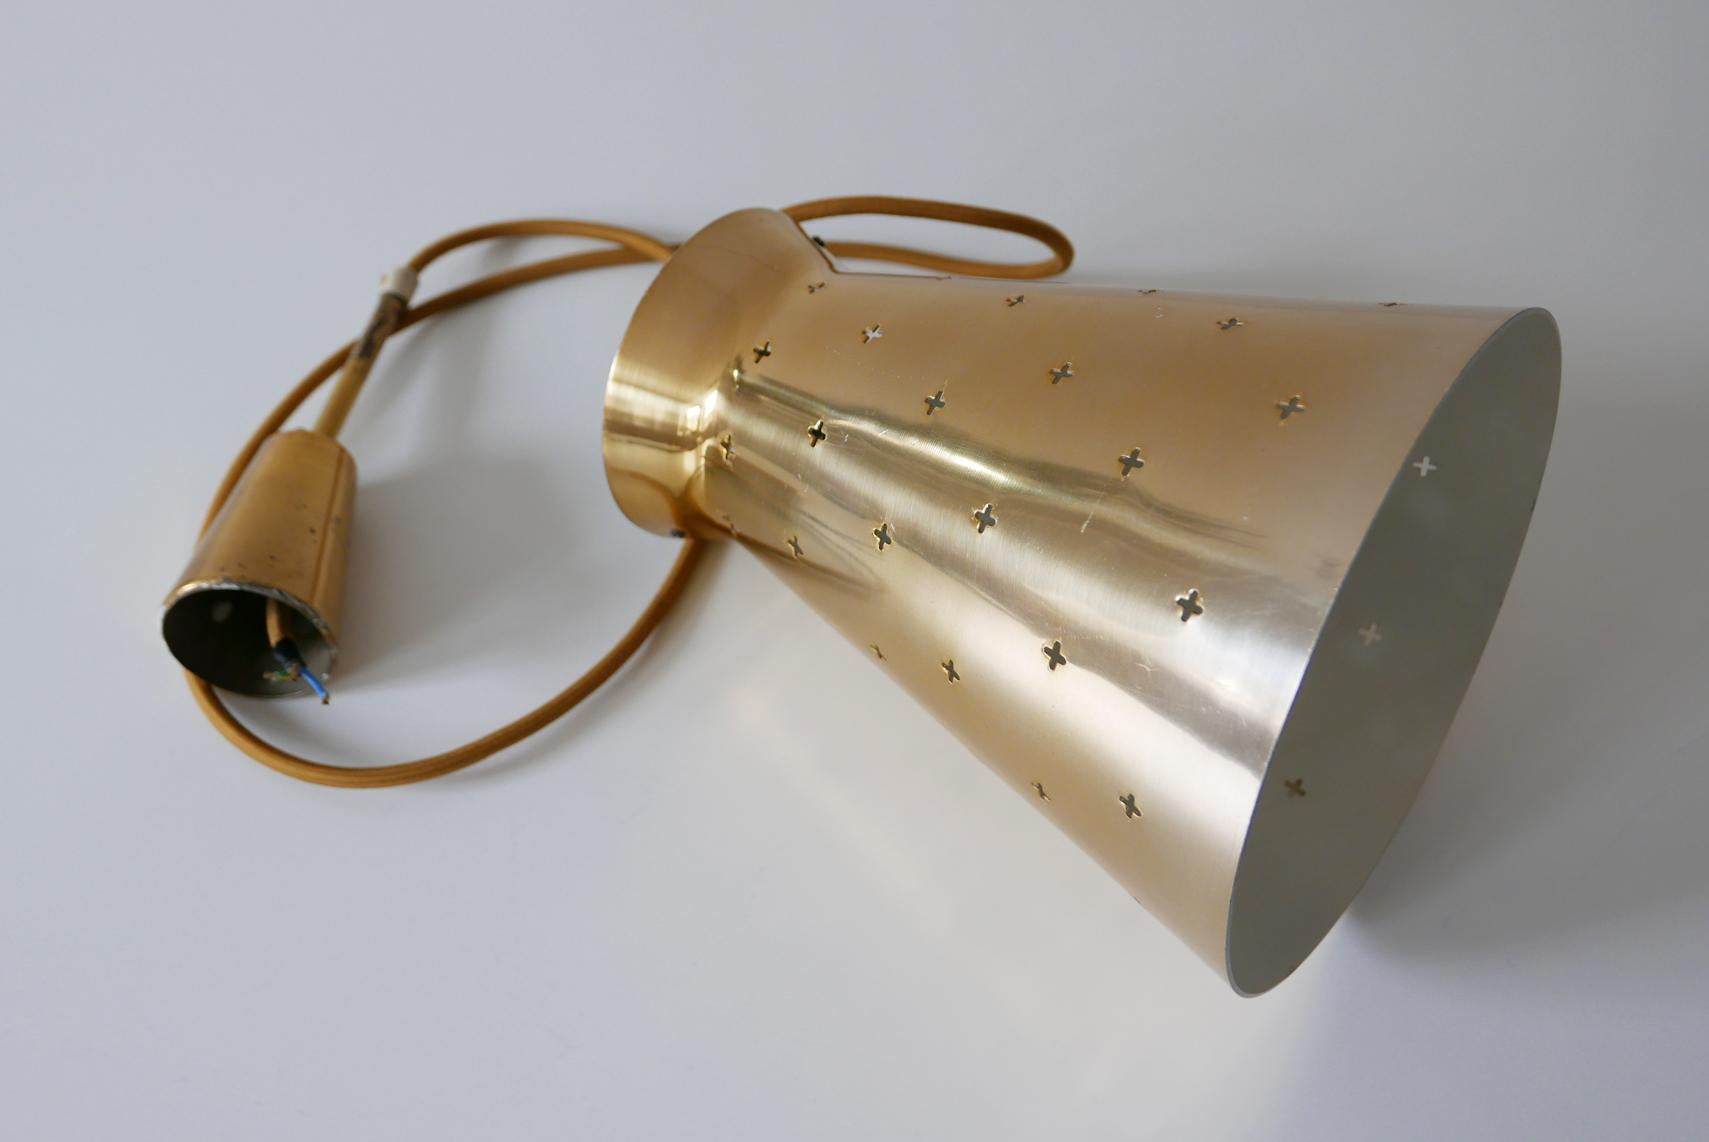 Lovely Mid-Century Modern Diabolo Pendant Lamp by Hillebrand, 1950s, Germany For Sale 6